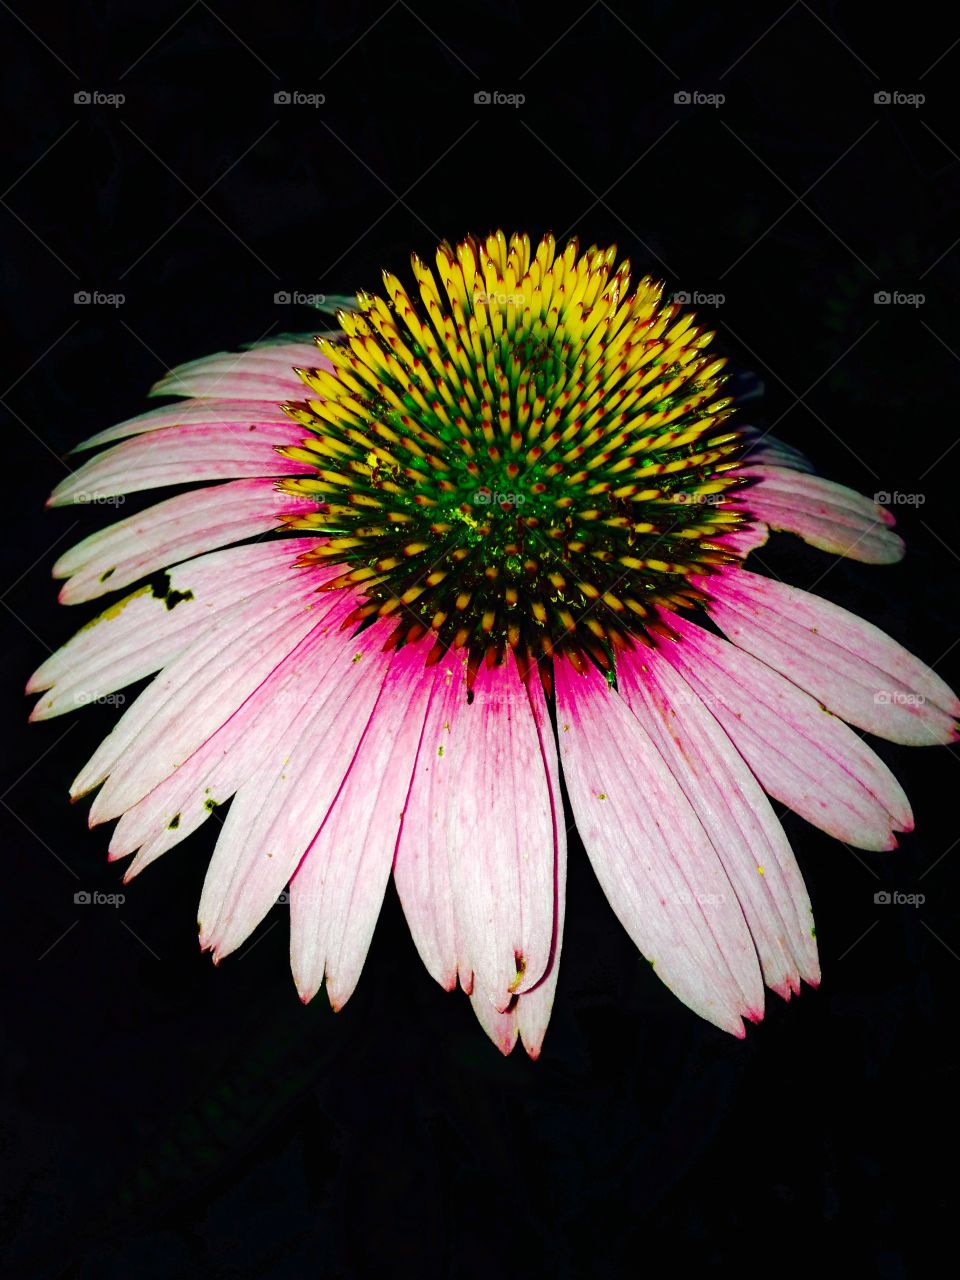 Coneflowers Pink, Floating. Took this pic after late afternoon. It looks like the flower is floating in the darkness.